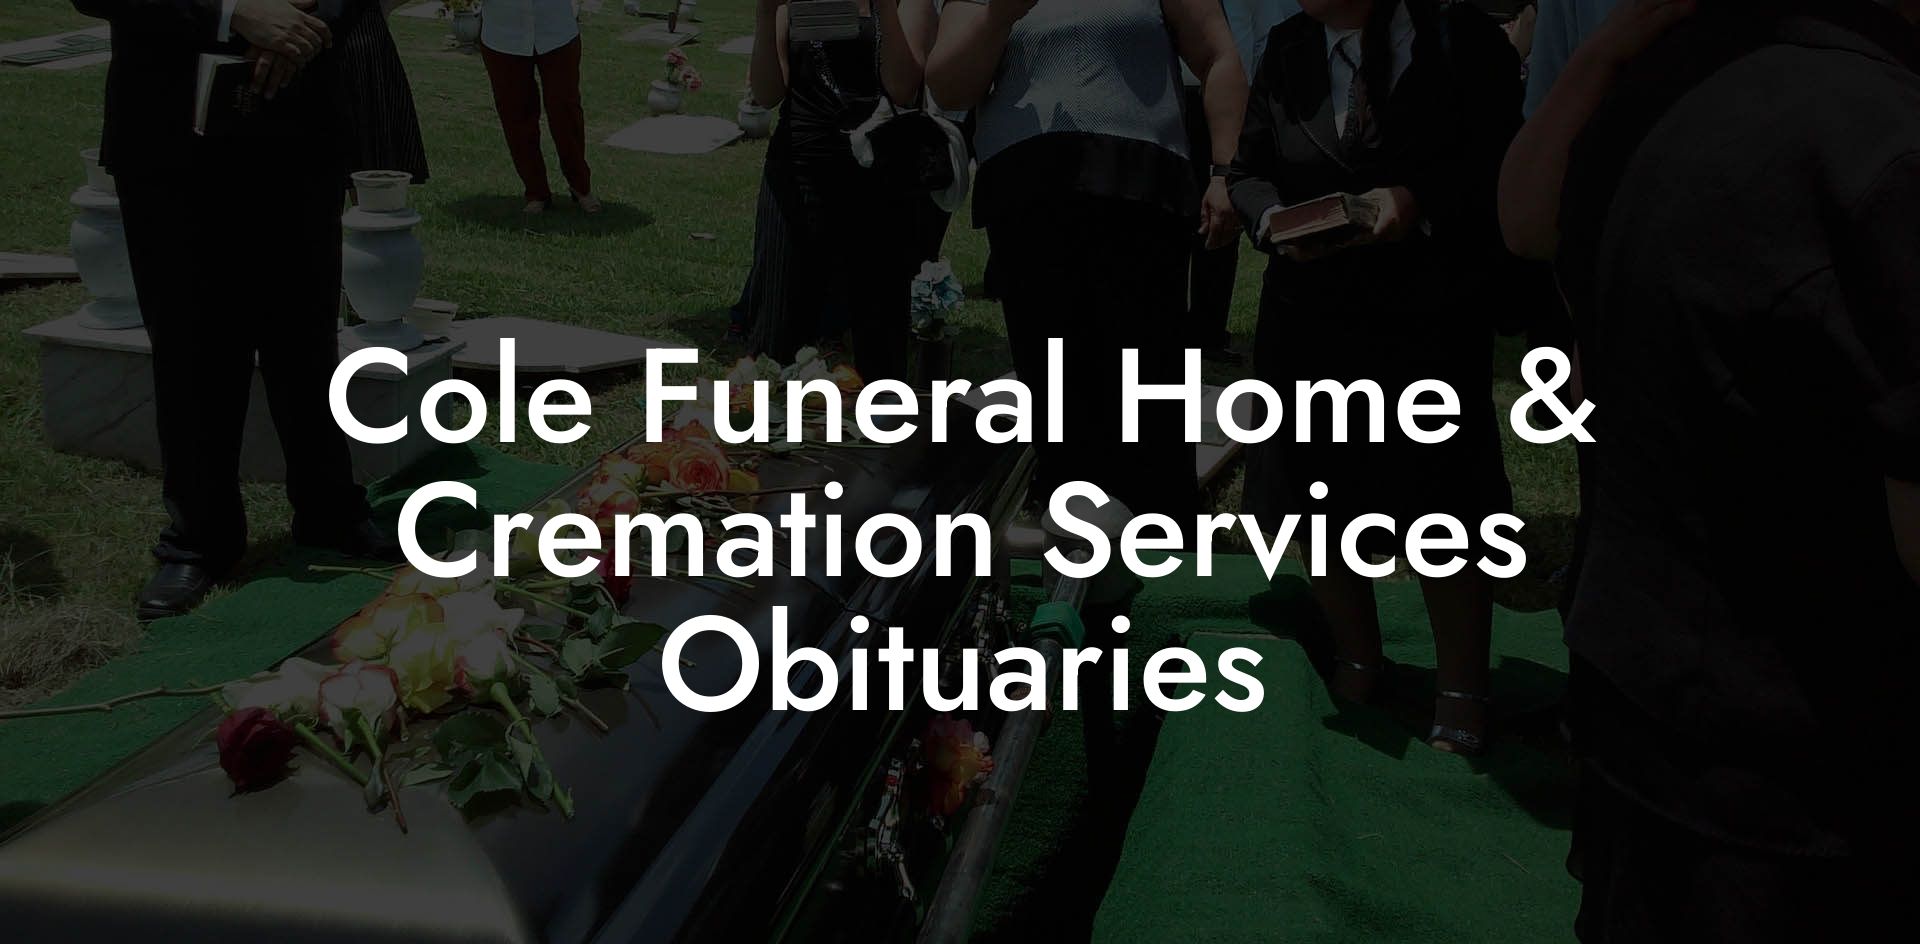 Cole Funeral Home & Cremation Services Obituaries